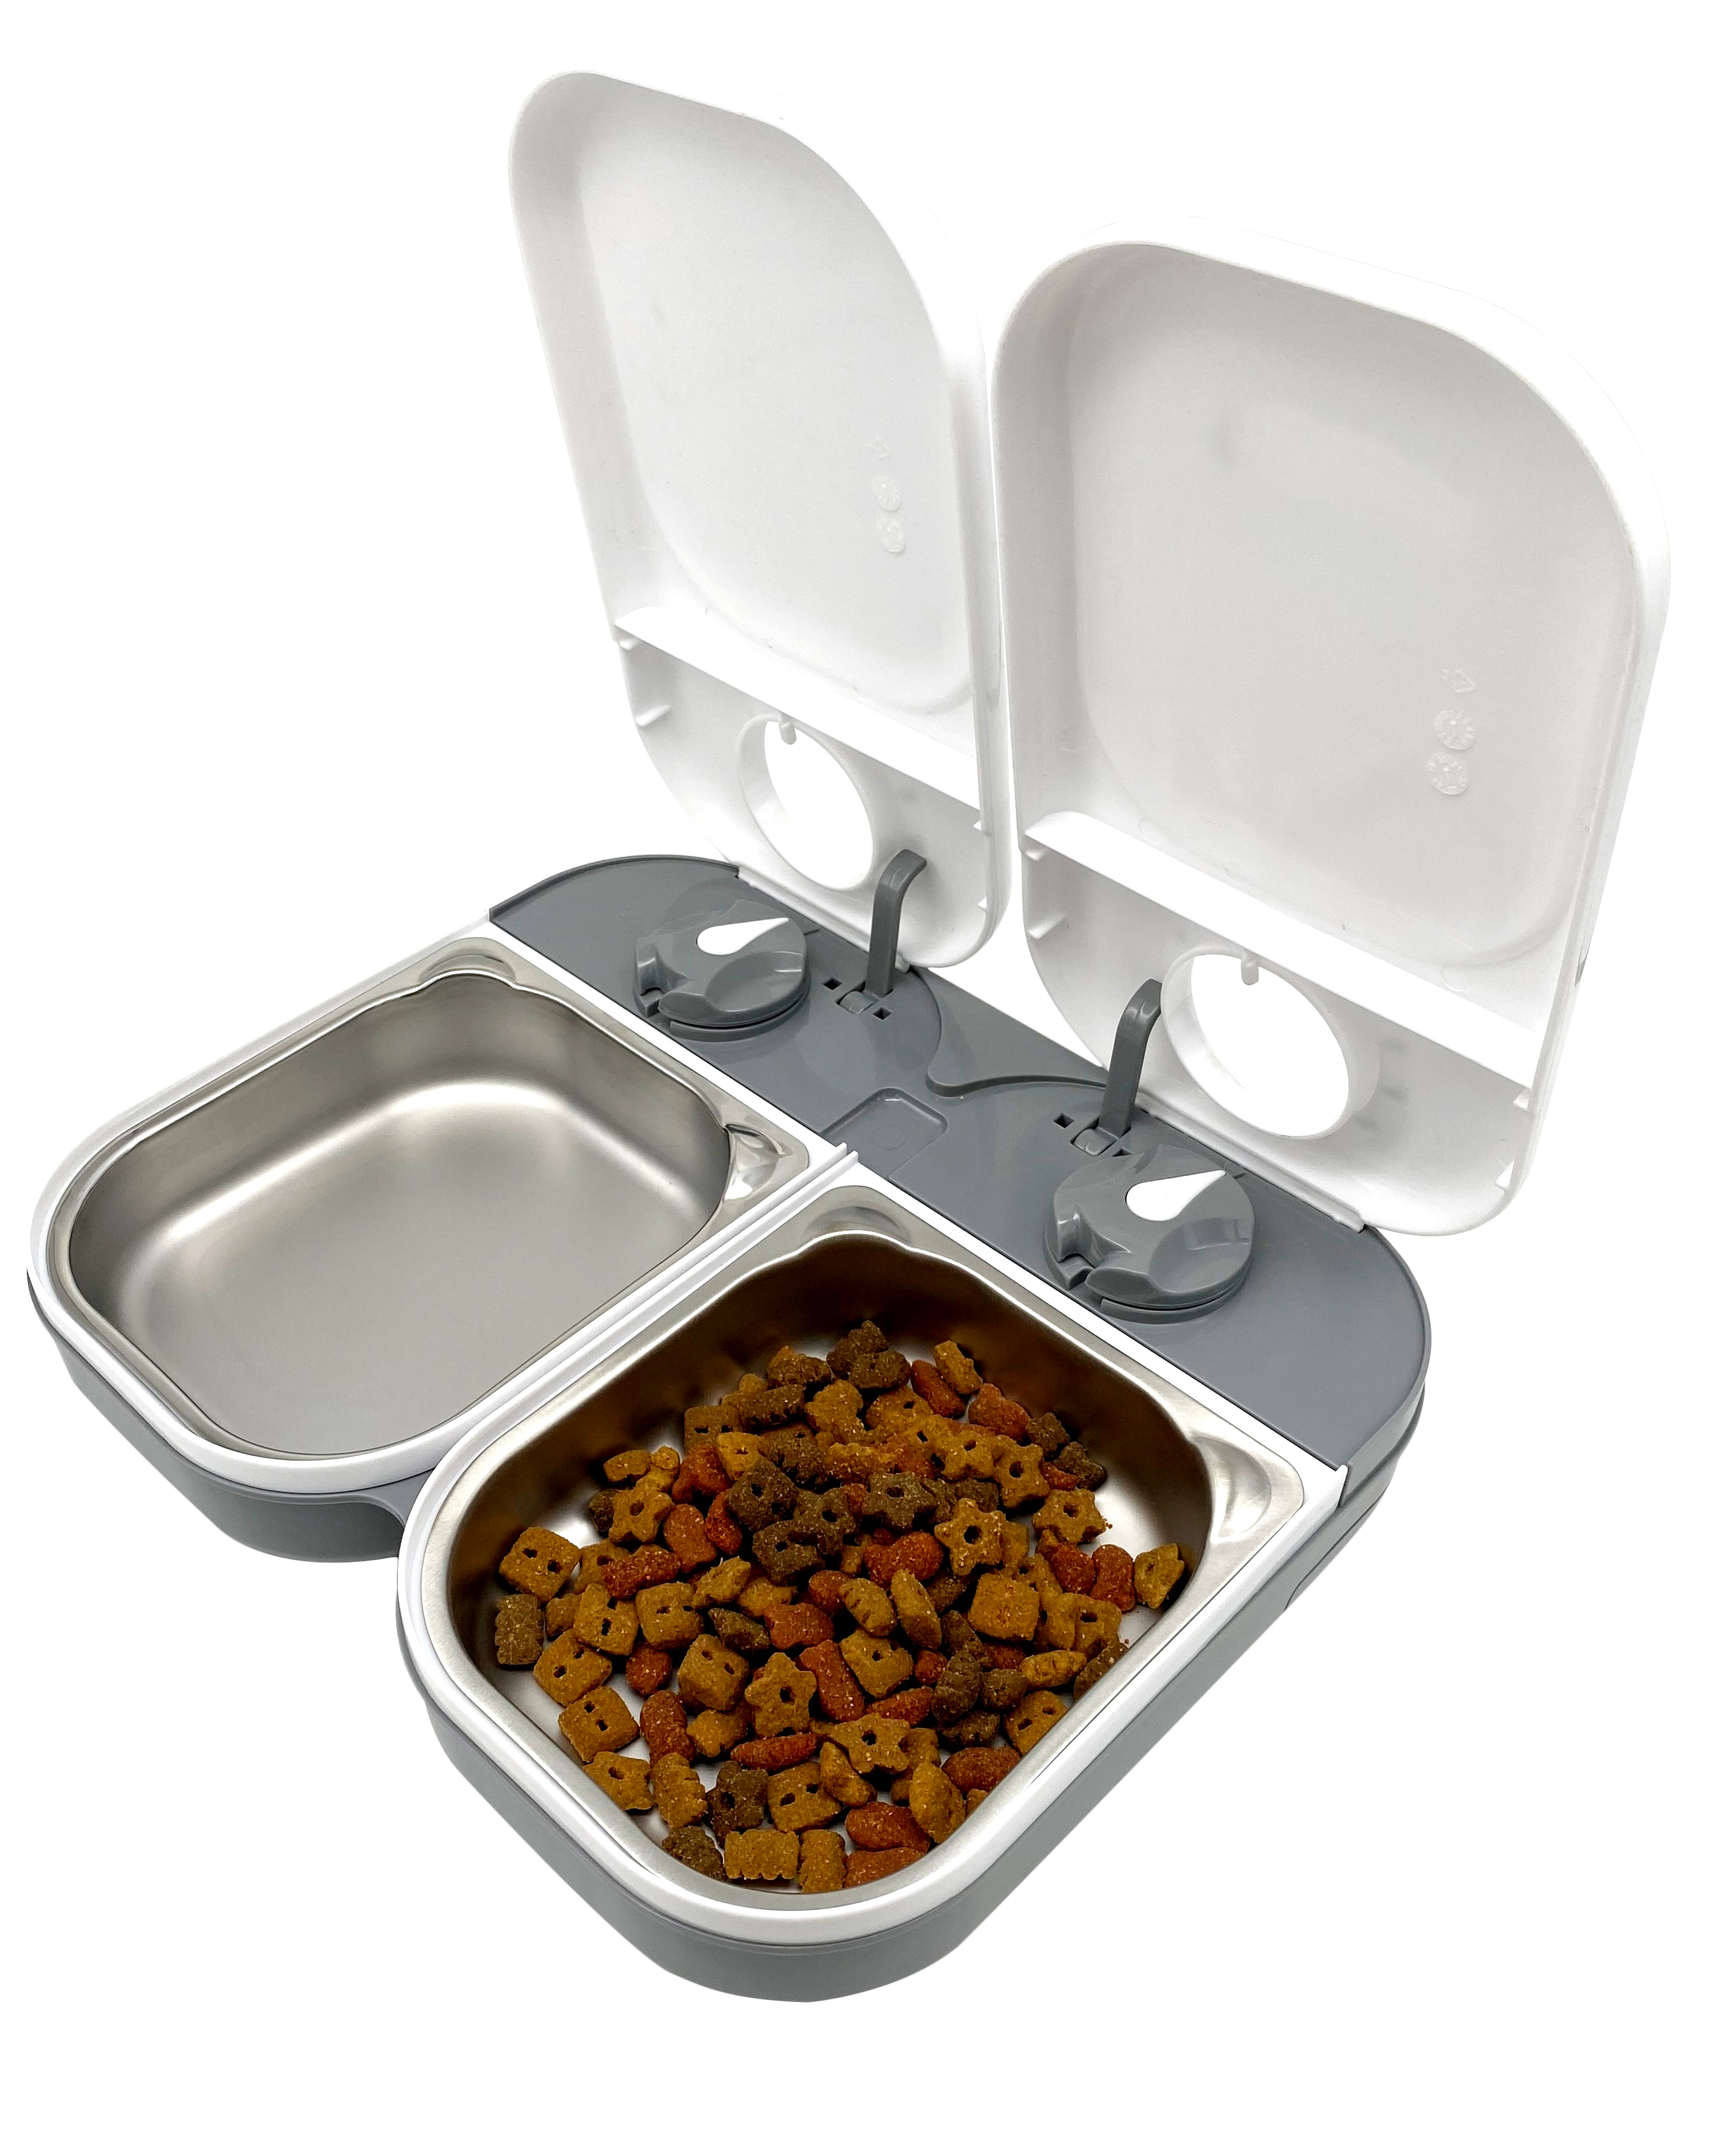 Two-Meal Automatic Pet Feeder with Stainless Steel Bowl Inserts (C200)